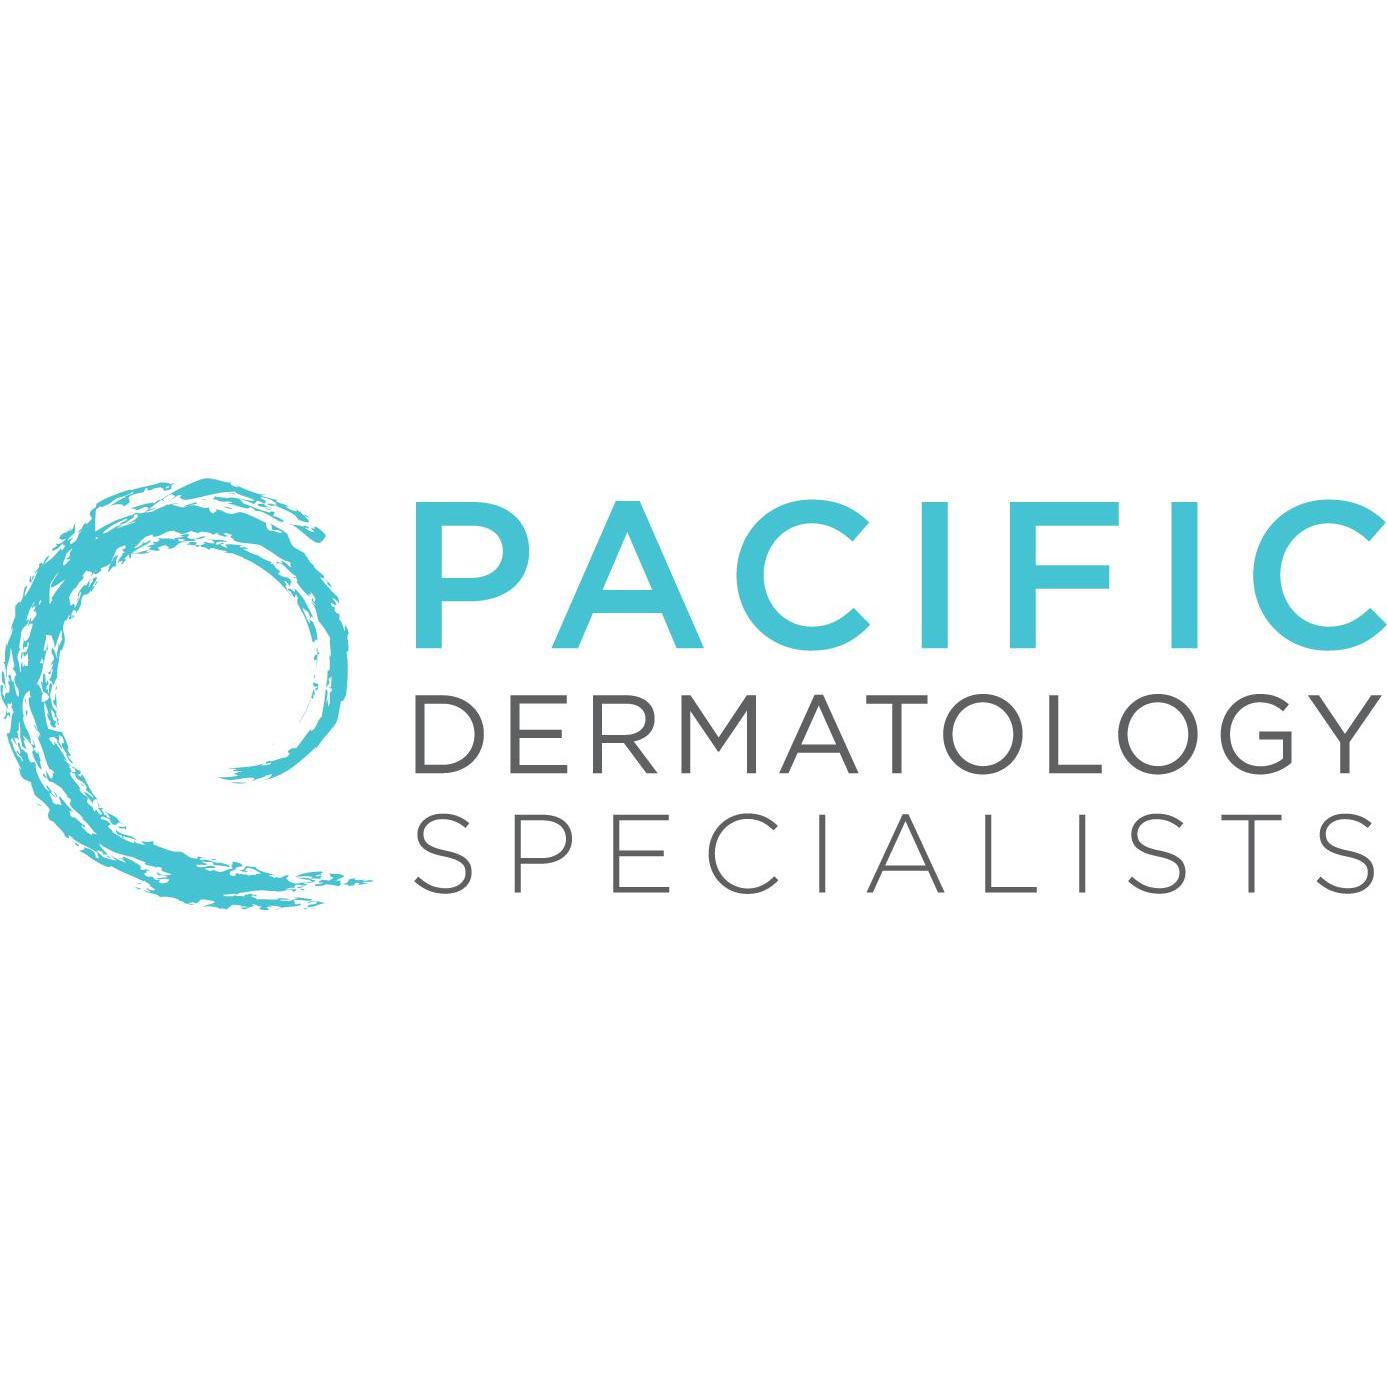 Pacific Dermatology Specialists is a leading dermatology clinic in Torrance, CA. We offer a wide ran Pacific Dermatology Specialists Torrance (310)373-6952